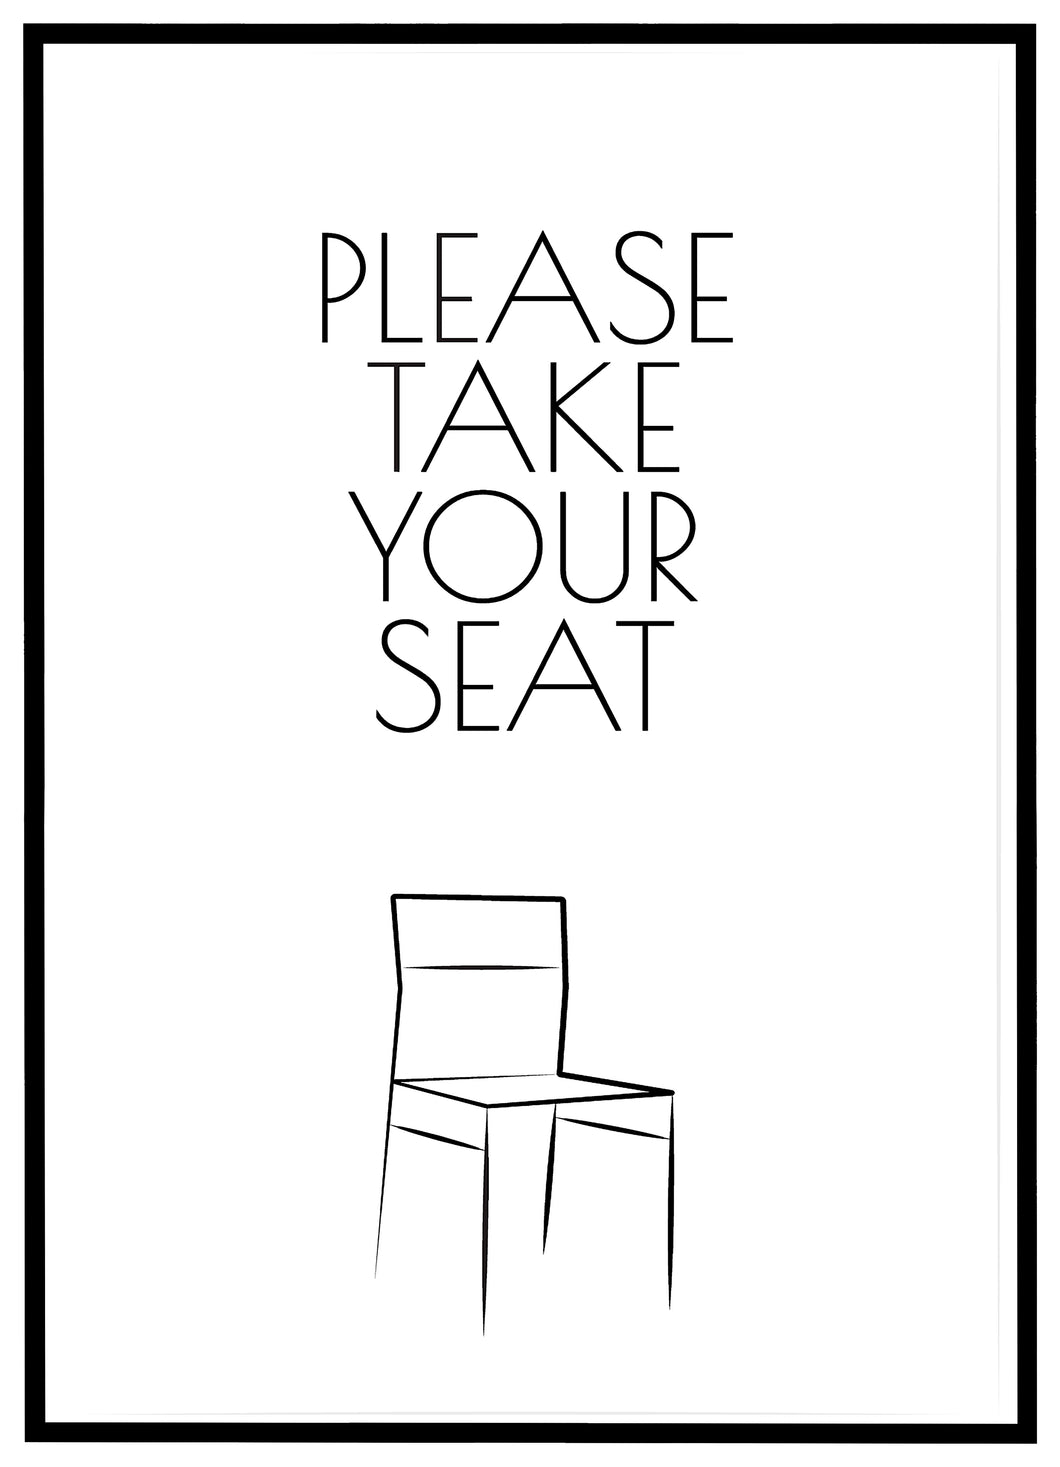 Please Take Your Seat - Plakat